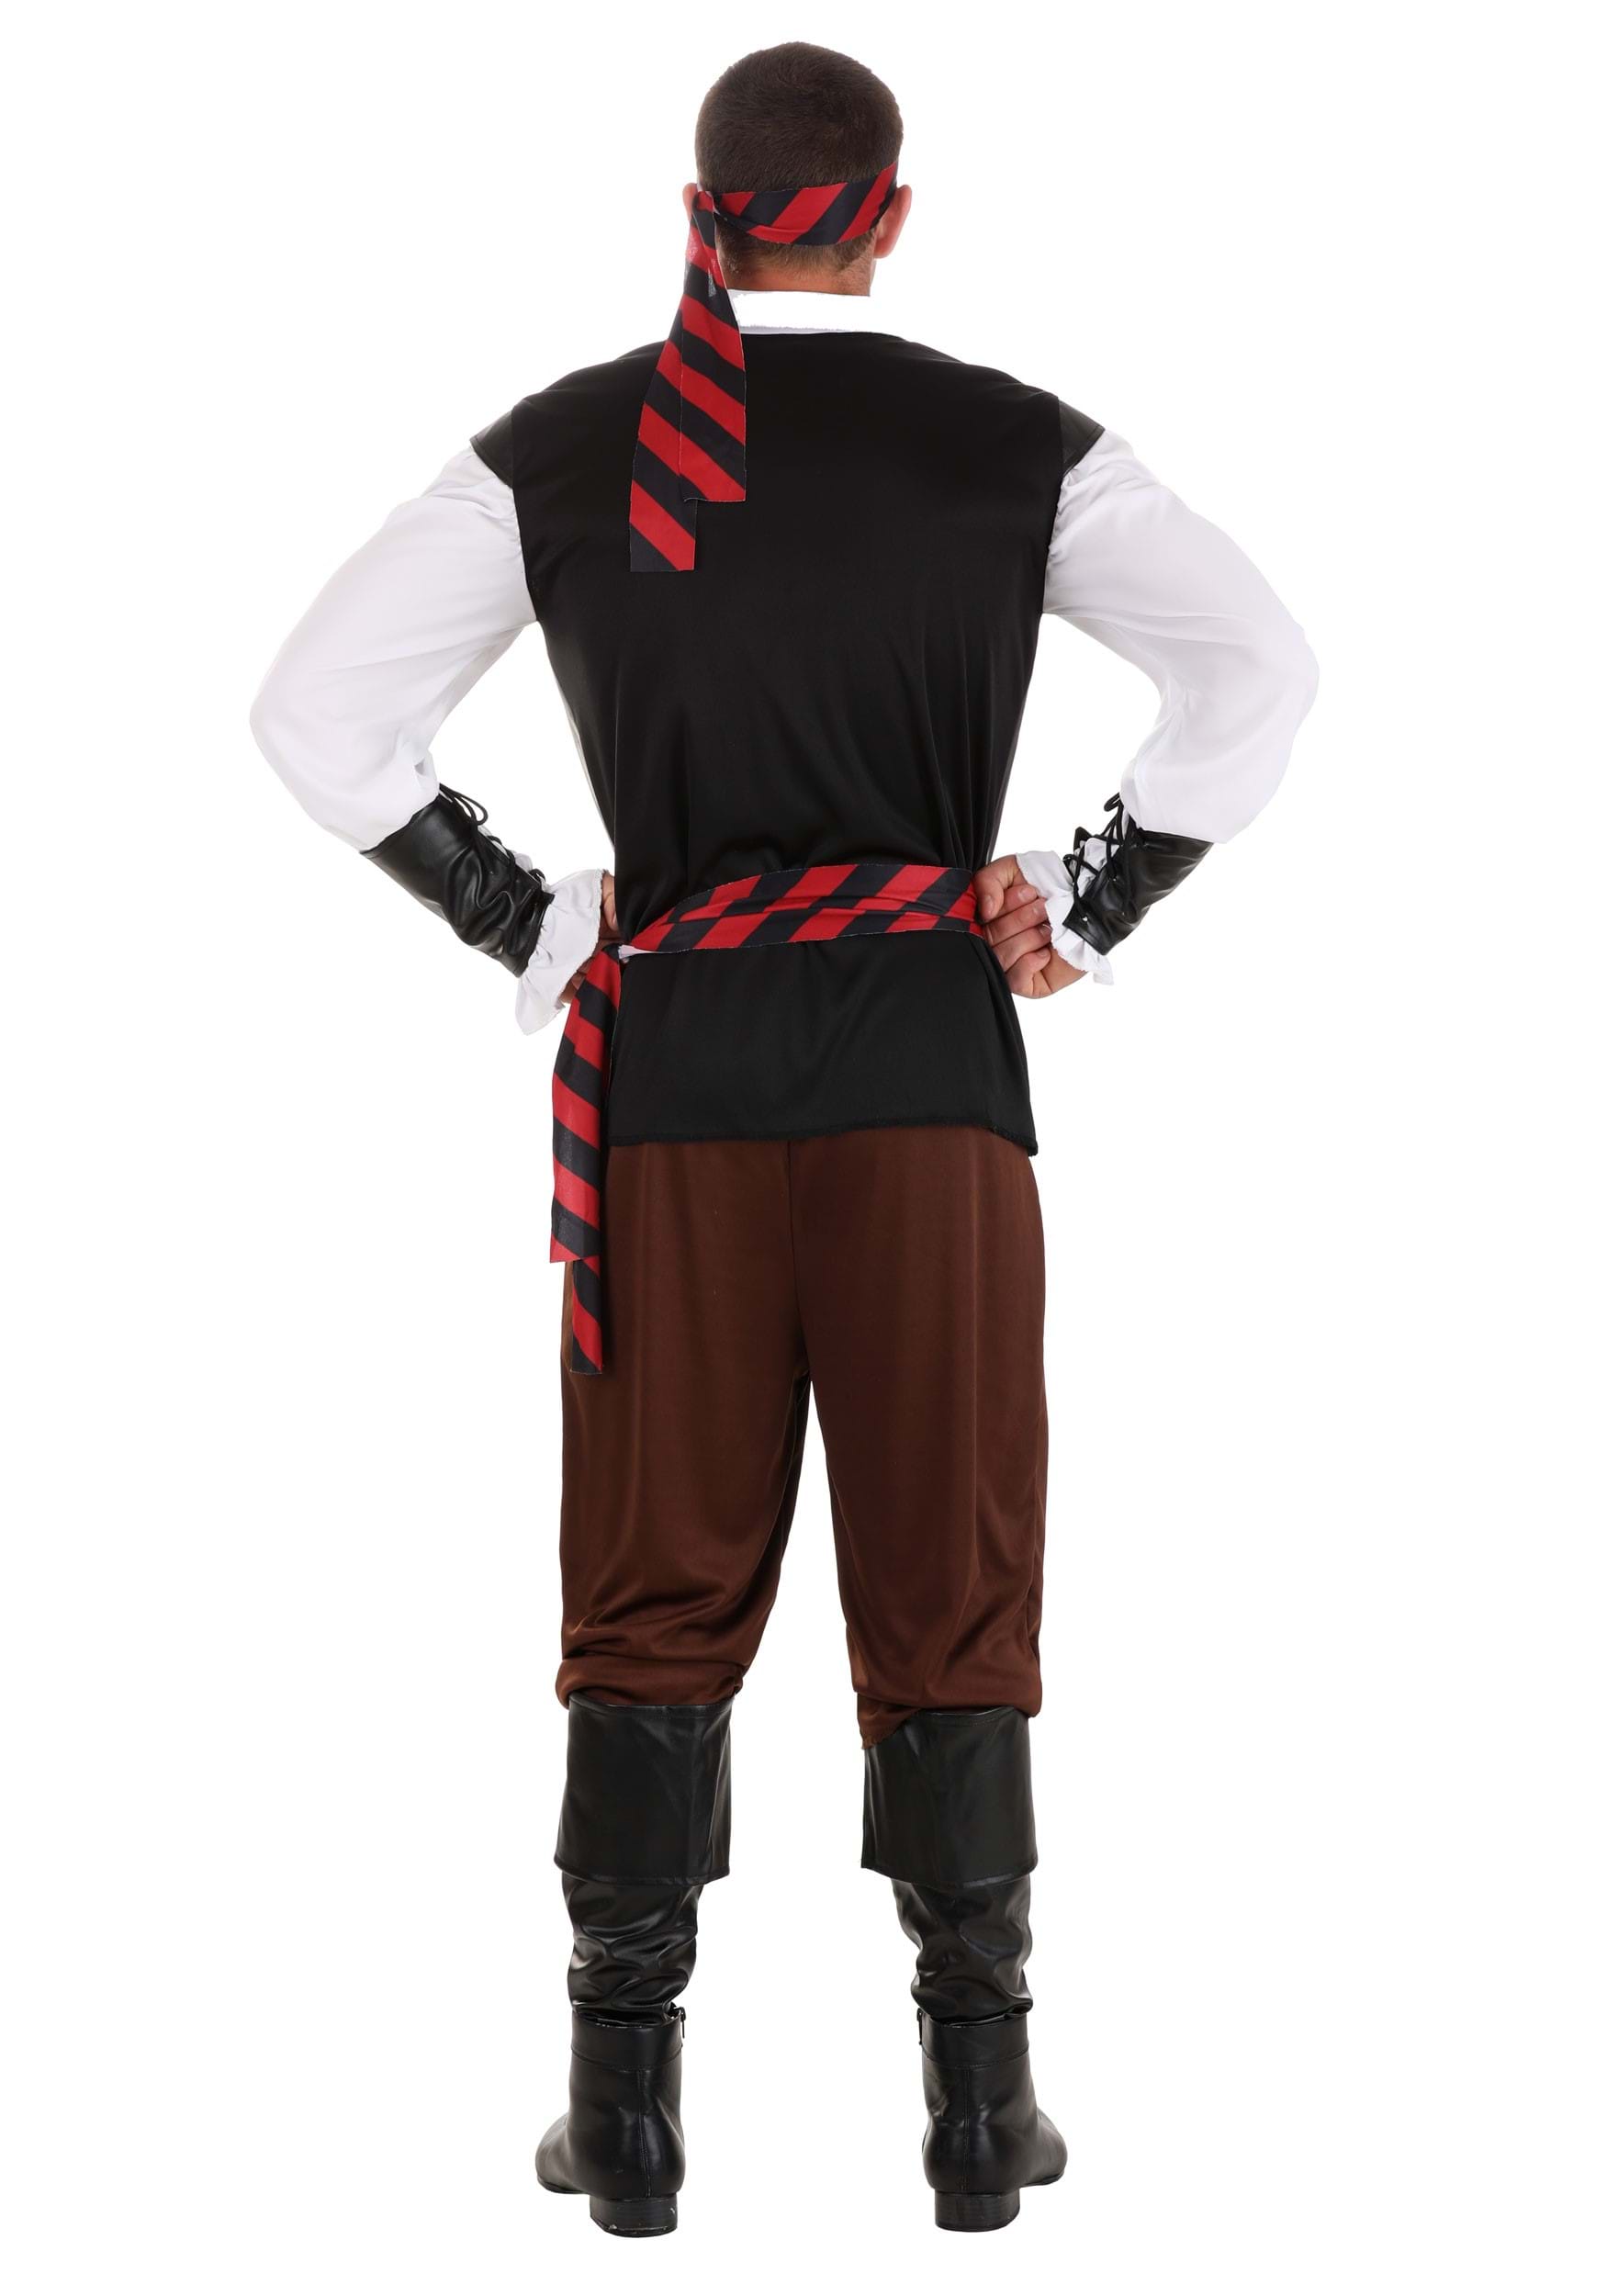 Budget Pirate Costume For Men